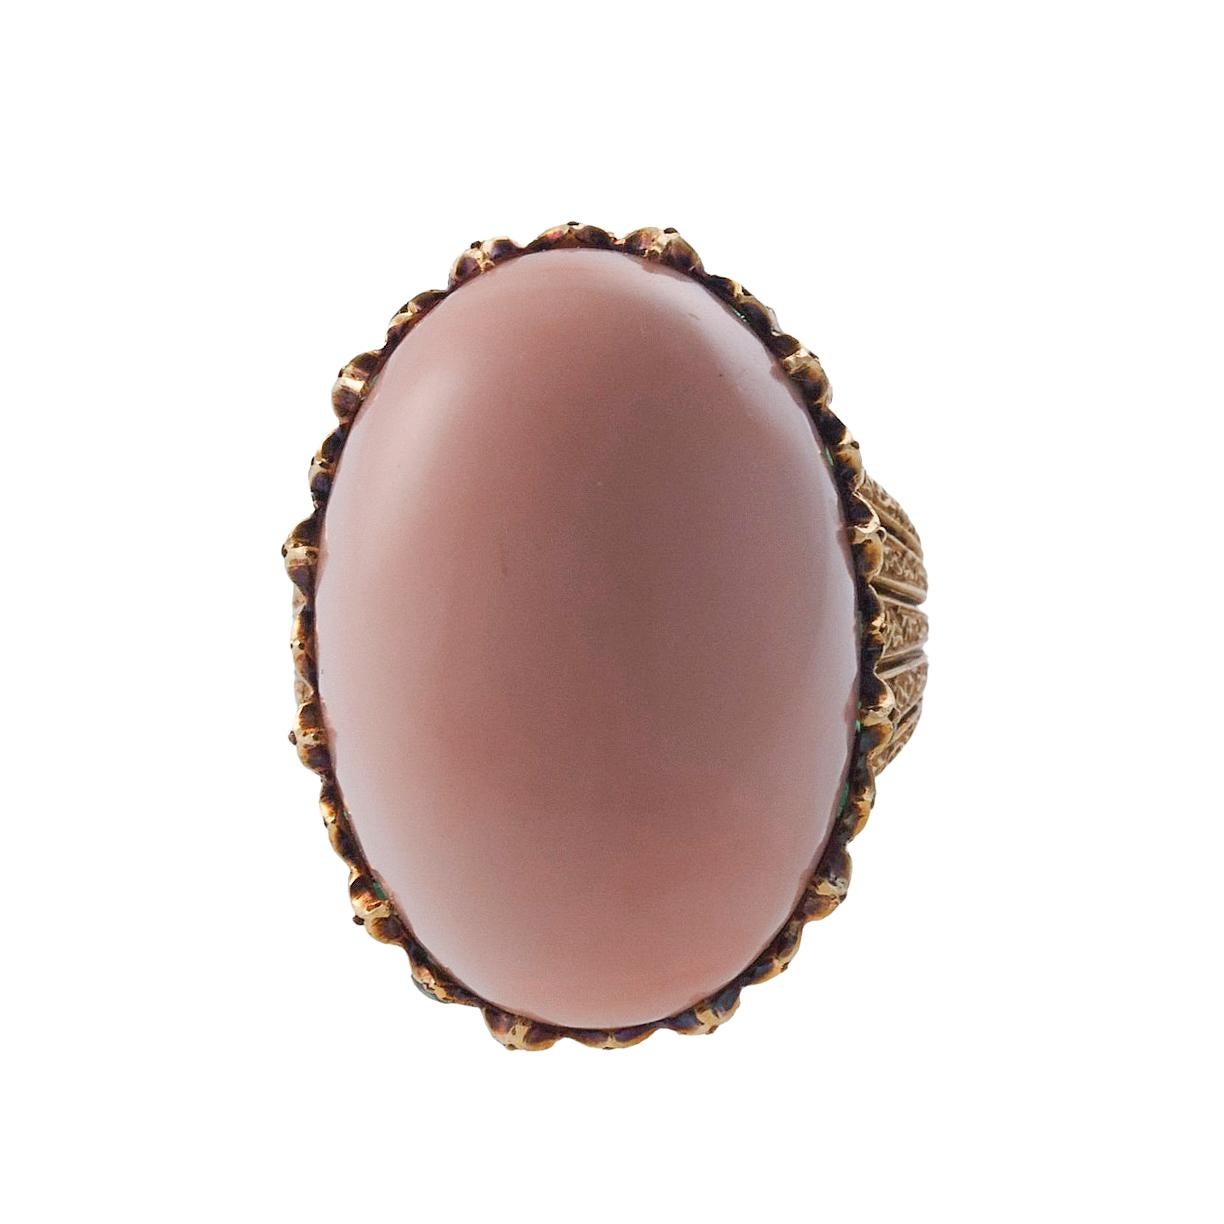 Buccellati 18k gold ring, set with coral and emeralds. Ring size 6.5., top measures 25mm x 19mm. Marked: Buccellati, Italy, 18K. Weight is 19.2 grams.